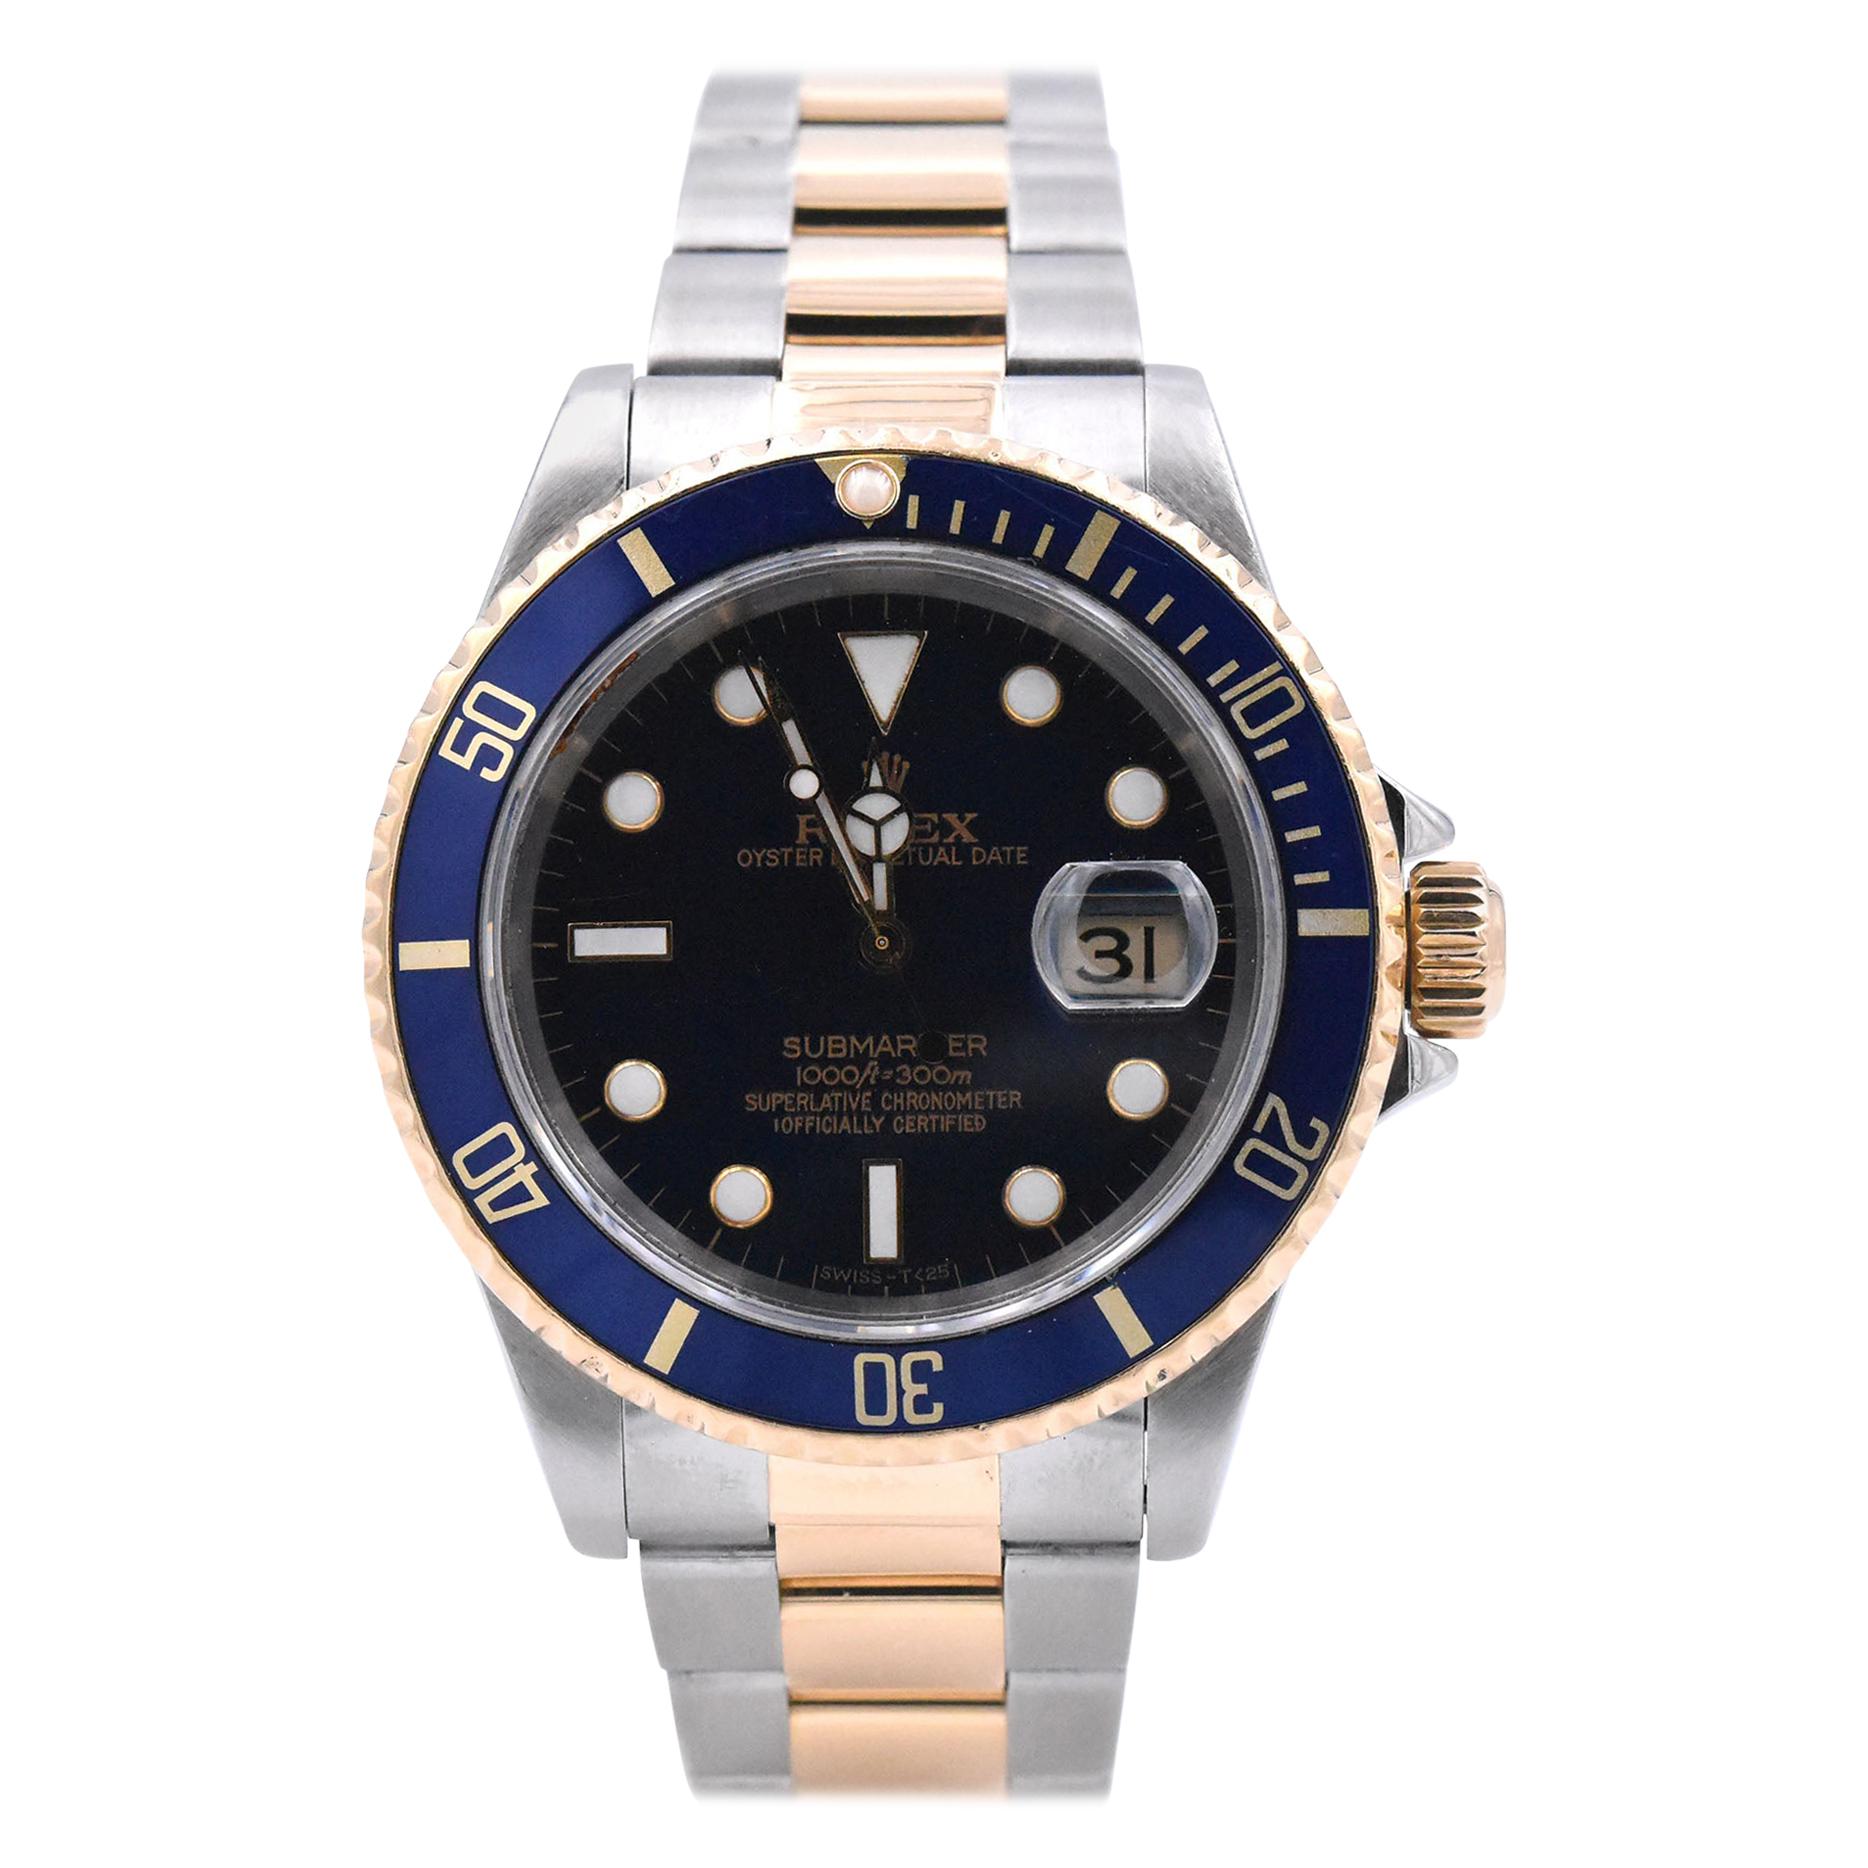 Rolex Submariner Two-Tone Blue Dial Watch Ref. 16613